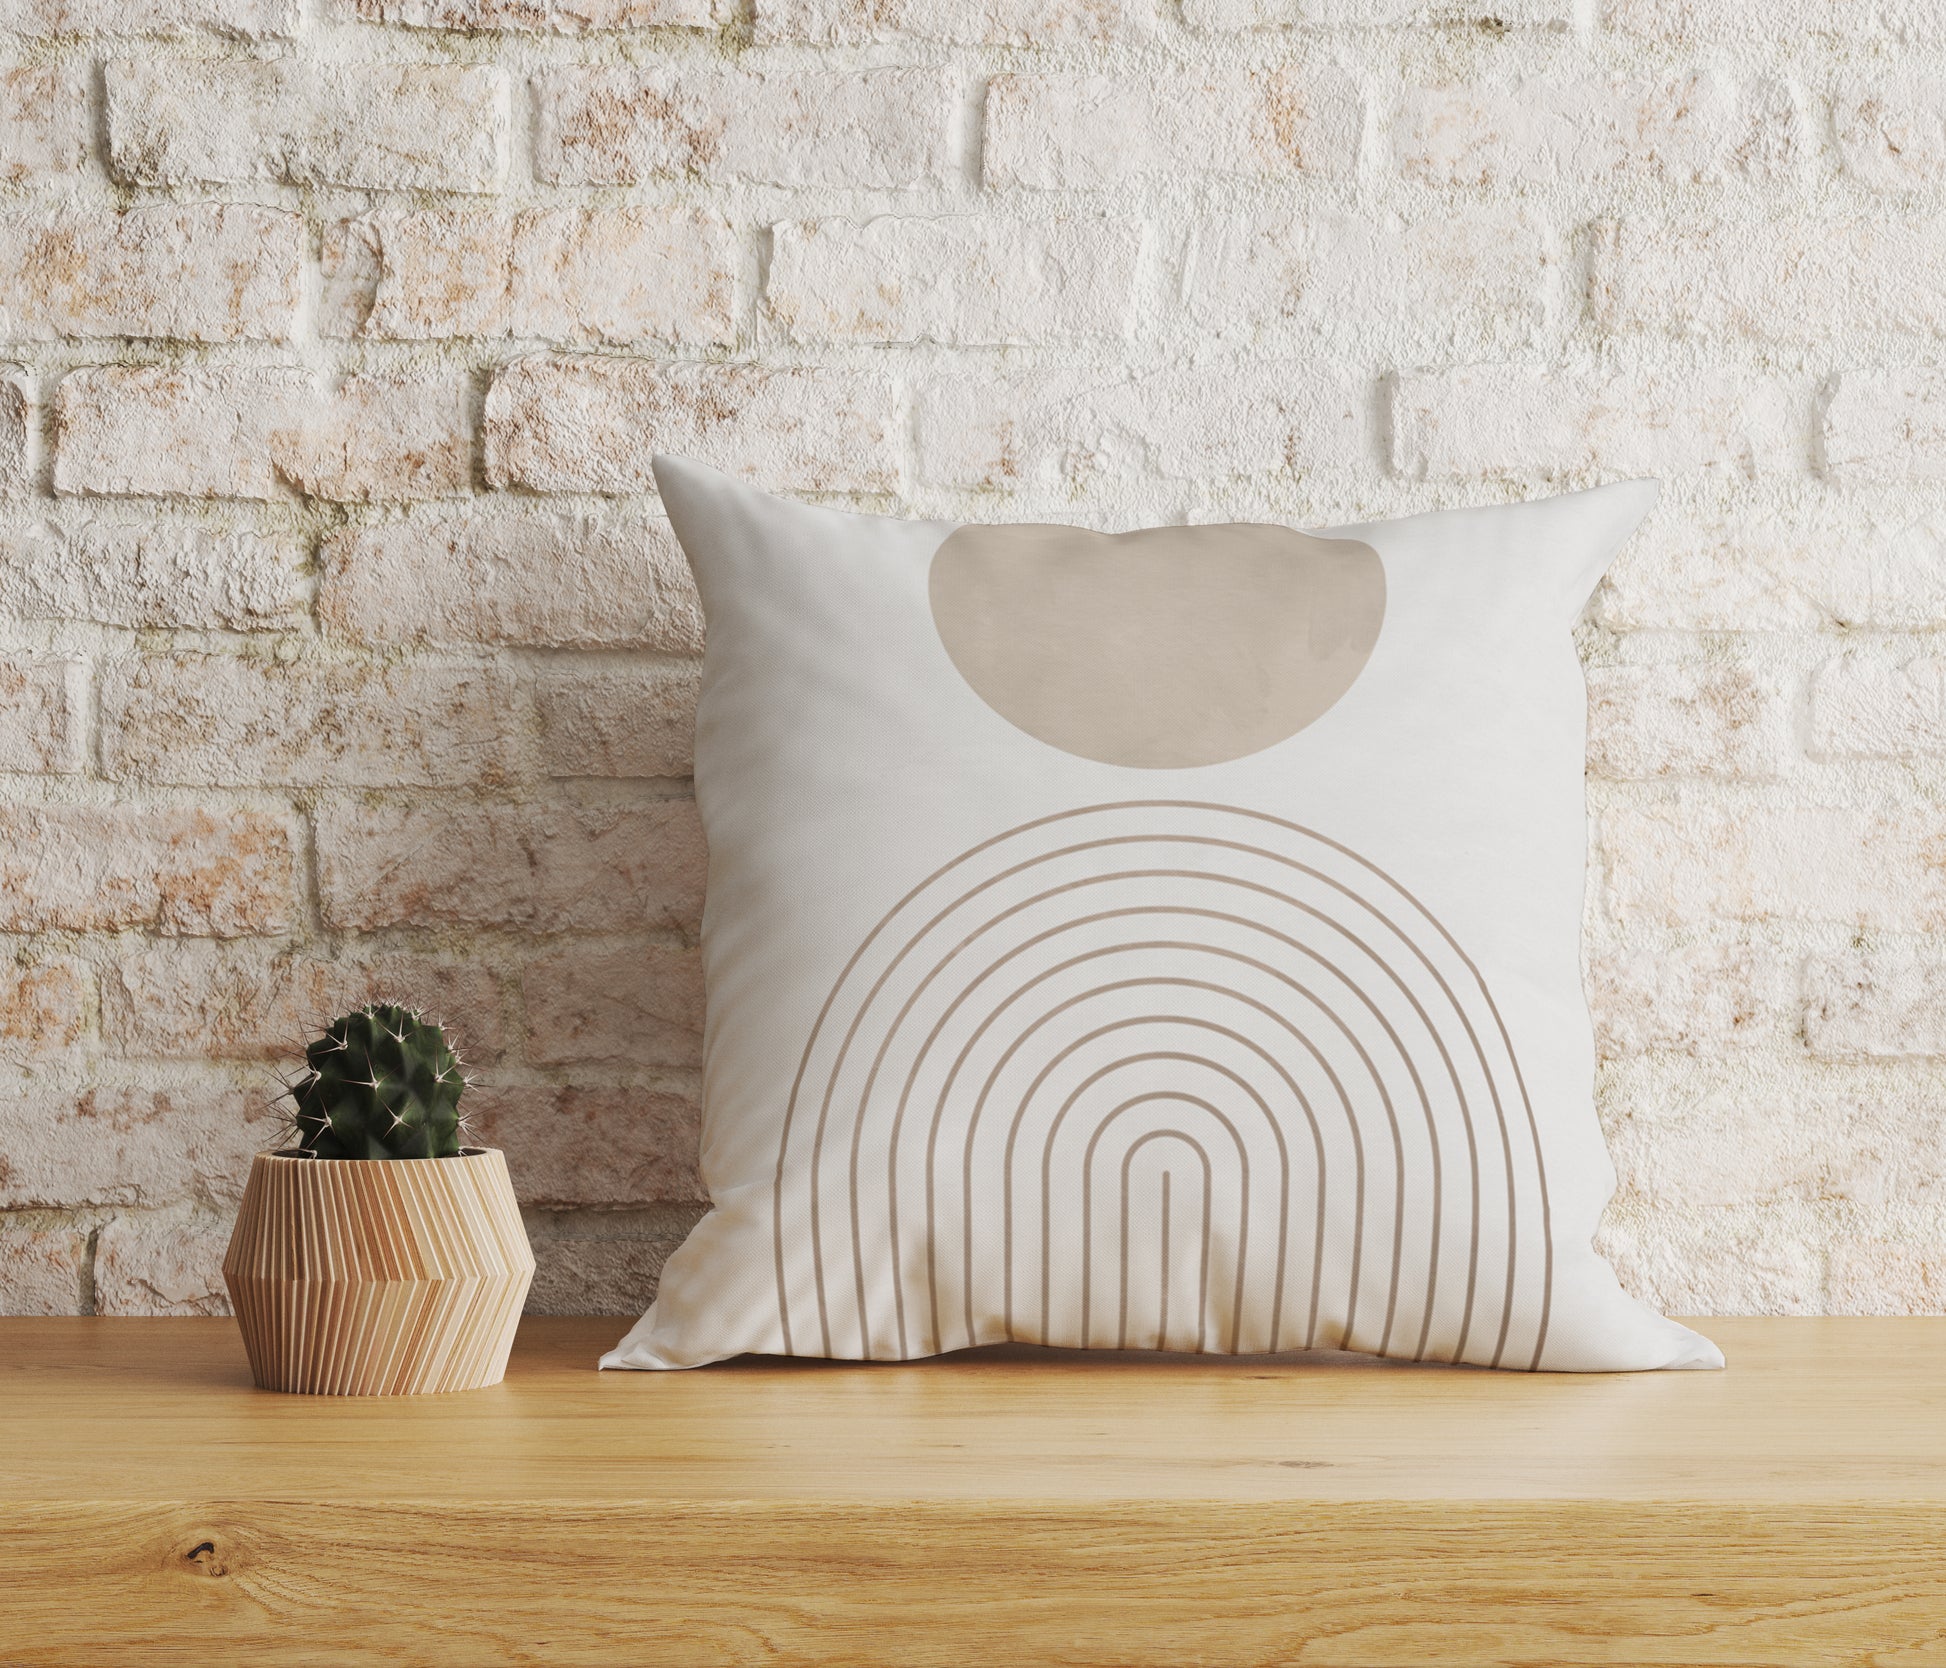 Simple Boho Pattern Pillow Cushion & Cover, Modern Decorative Throw Pillow, Sofa Living Room Bedroom Decoration Besontique